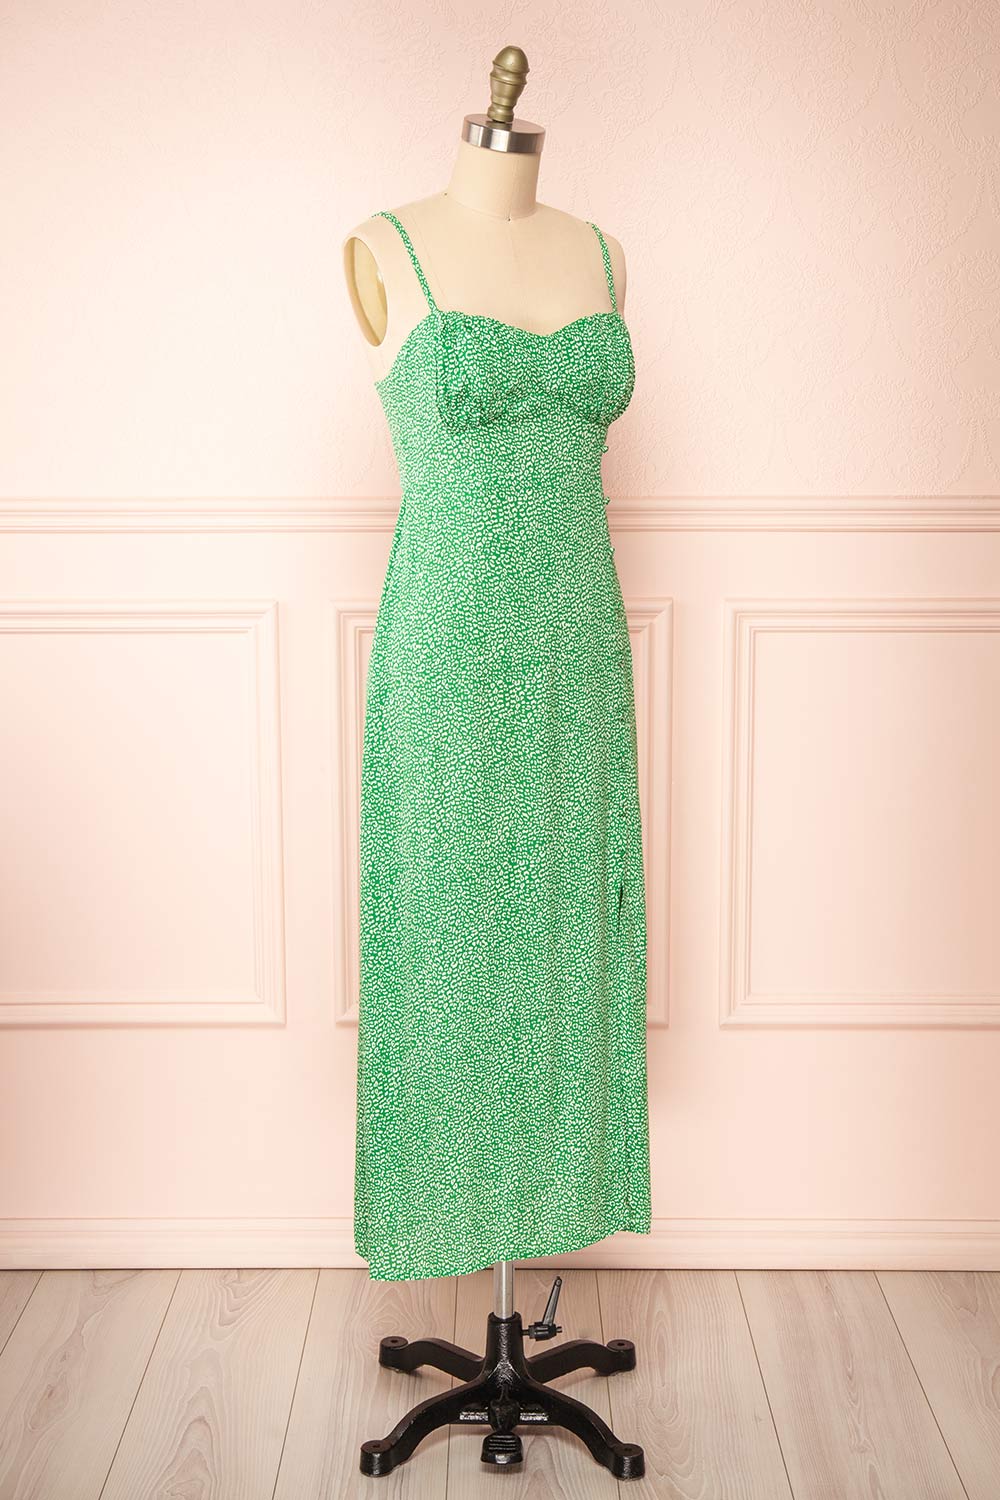 Aisai Patterned Green Midi Dress w/ Slit | Boutique 1861 side view 